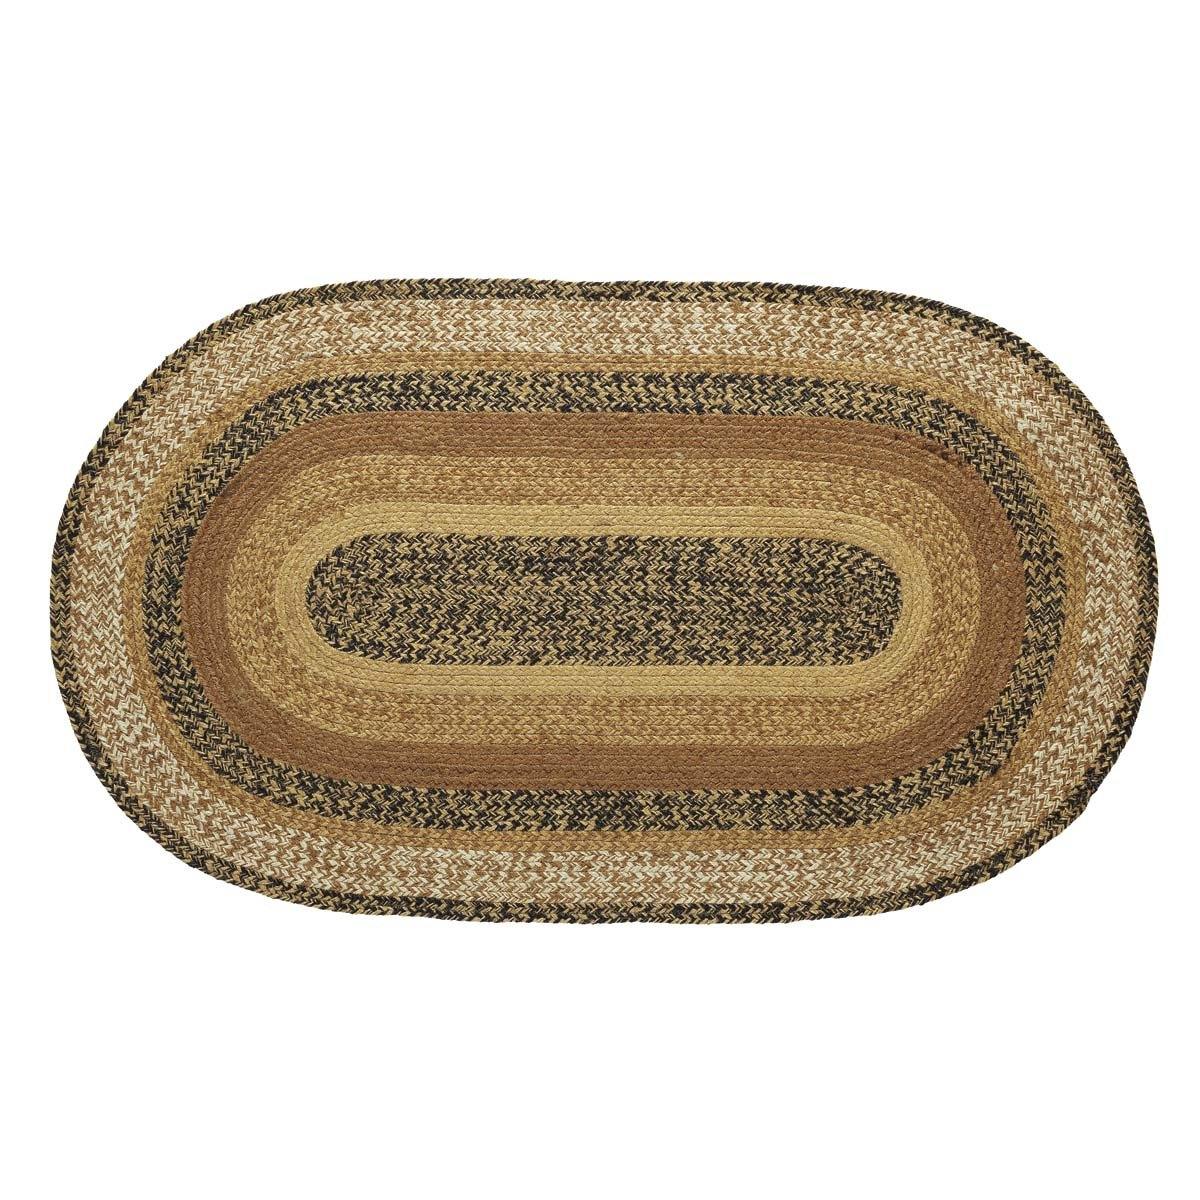 Kettle Grove Jute Braided Rug Oval 24"x36" with Rug Pad VHC Brands - The Fox Decor